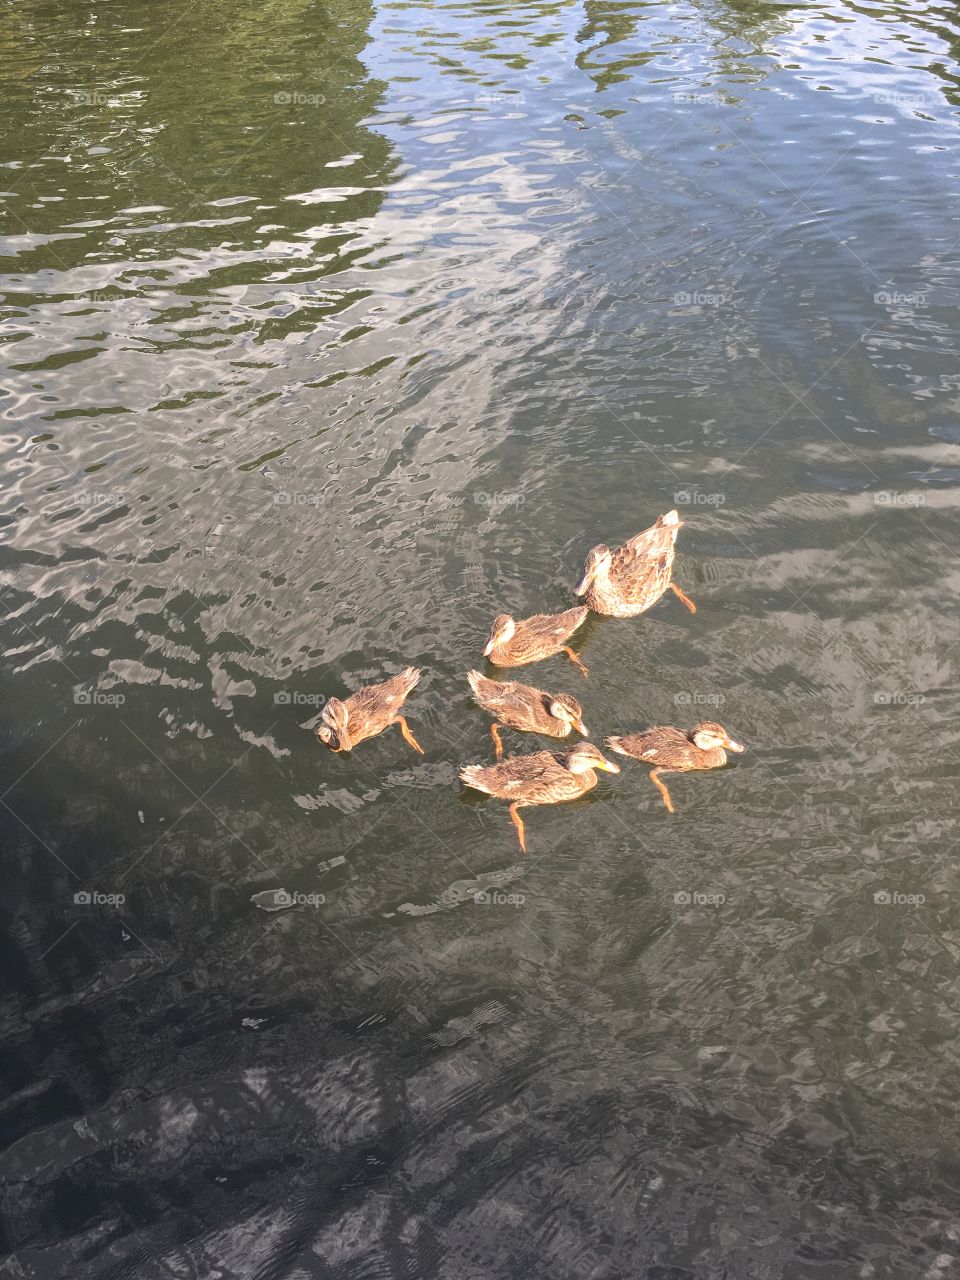 Momma ducks and her babies